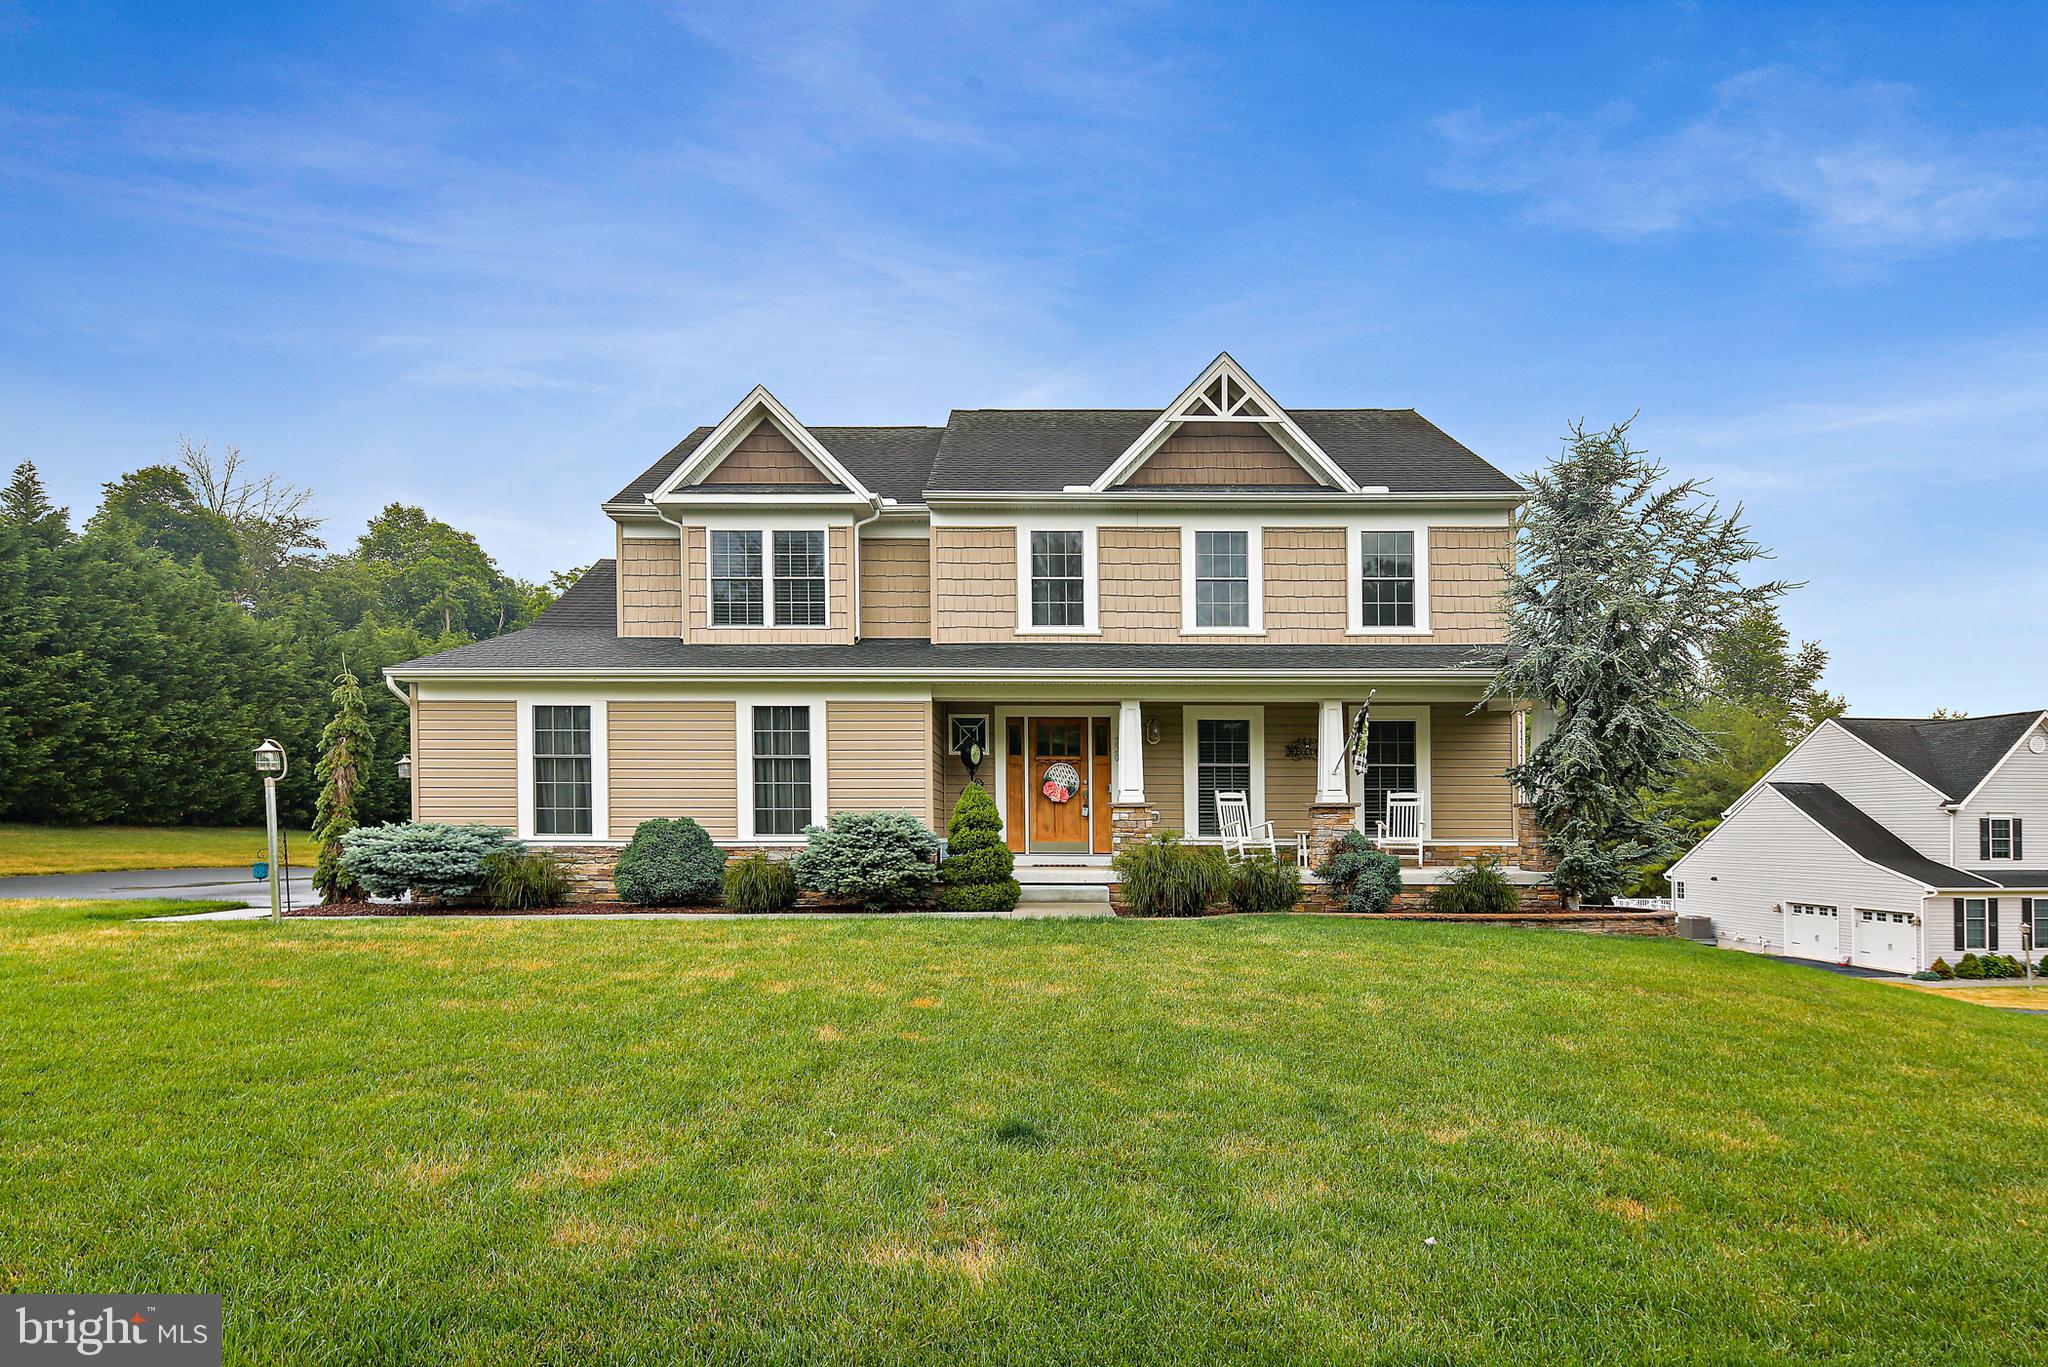 Welcome to this stunning 4 bedroom, 3.5 bath Colonial located in beautiful Murphy's Run.  This home 